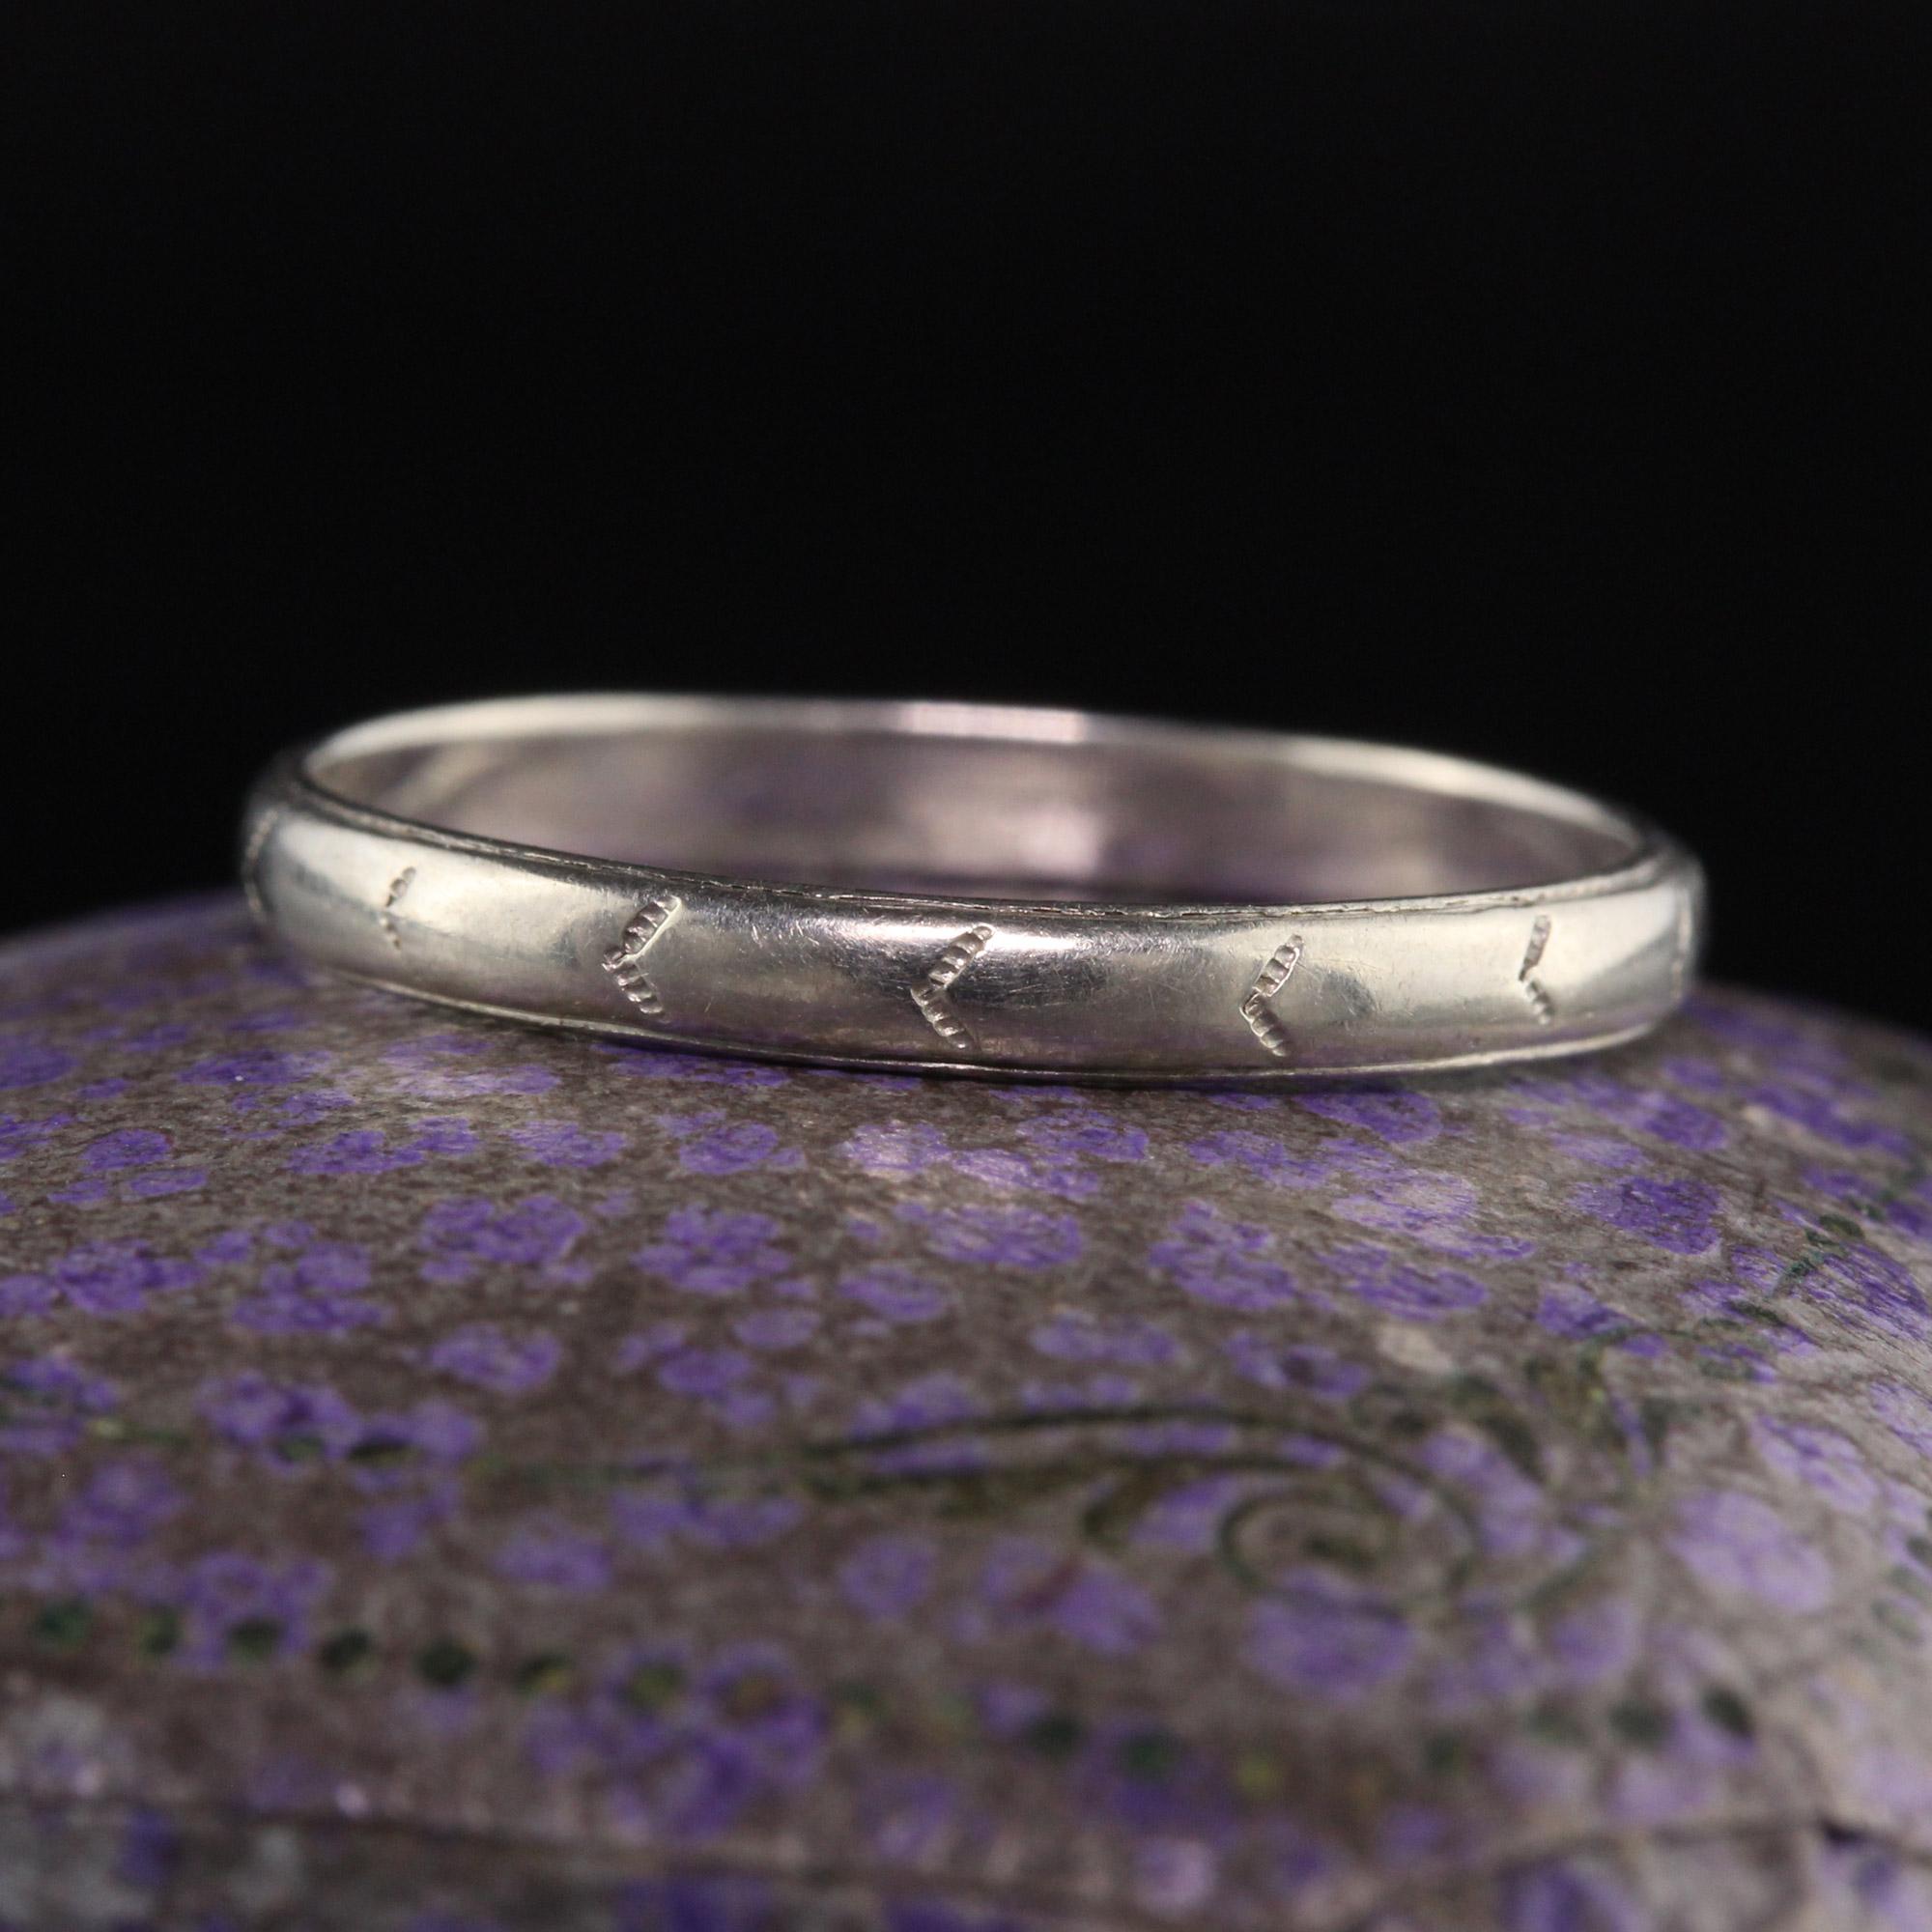 Beautiful Antique Art Deco 18K White Gold Engraved Wedding Band - Size 6. This classic wedding band is crafted in 18k white gold. The band has light engravings going around the entire ring.

Item #R1273

Metal: 18K White Gold

Weight: 1.4